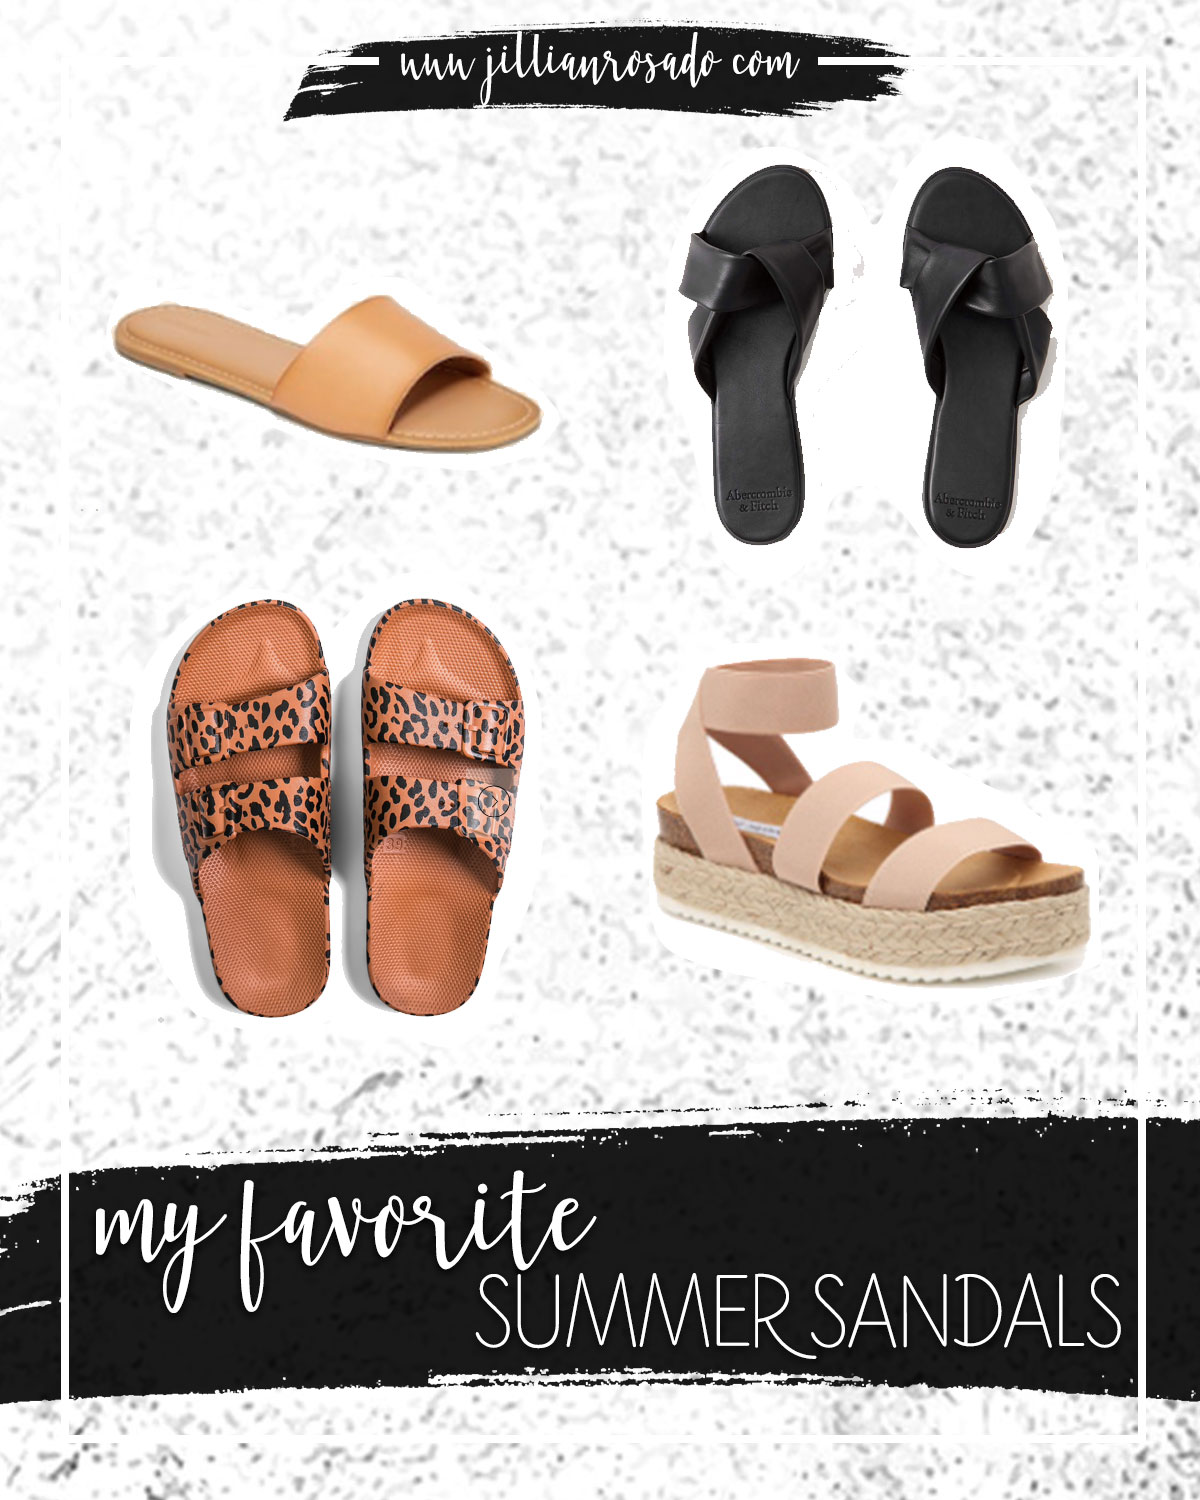 Favorite Summer Sandals Old Navy Abercrombie Freedom Moses Steve Madden Kimmie